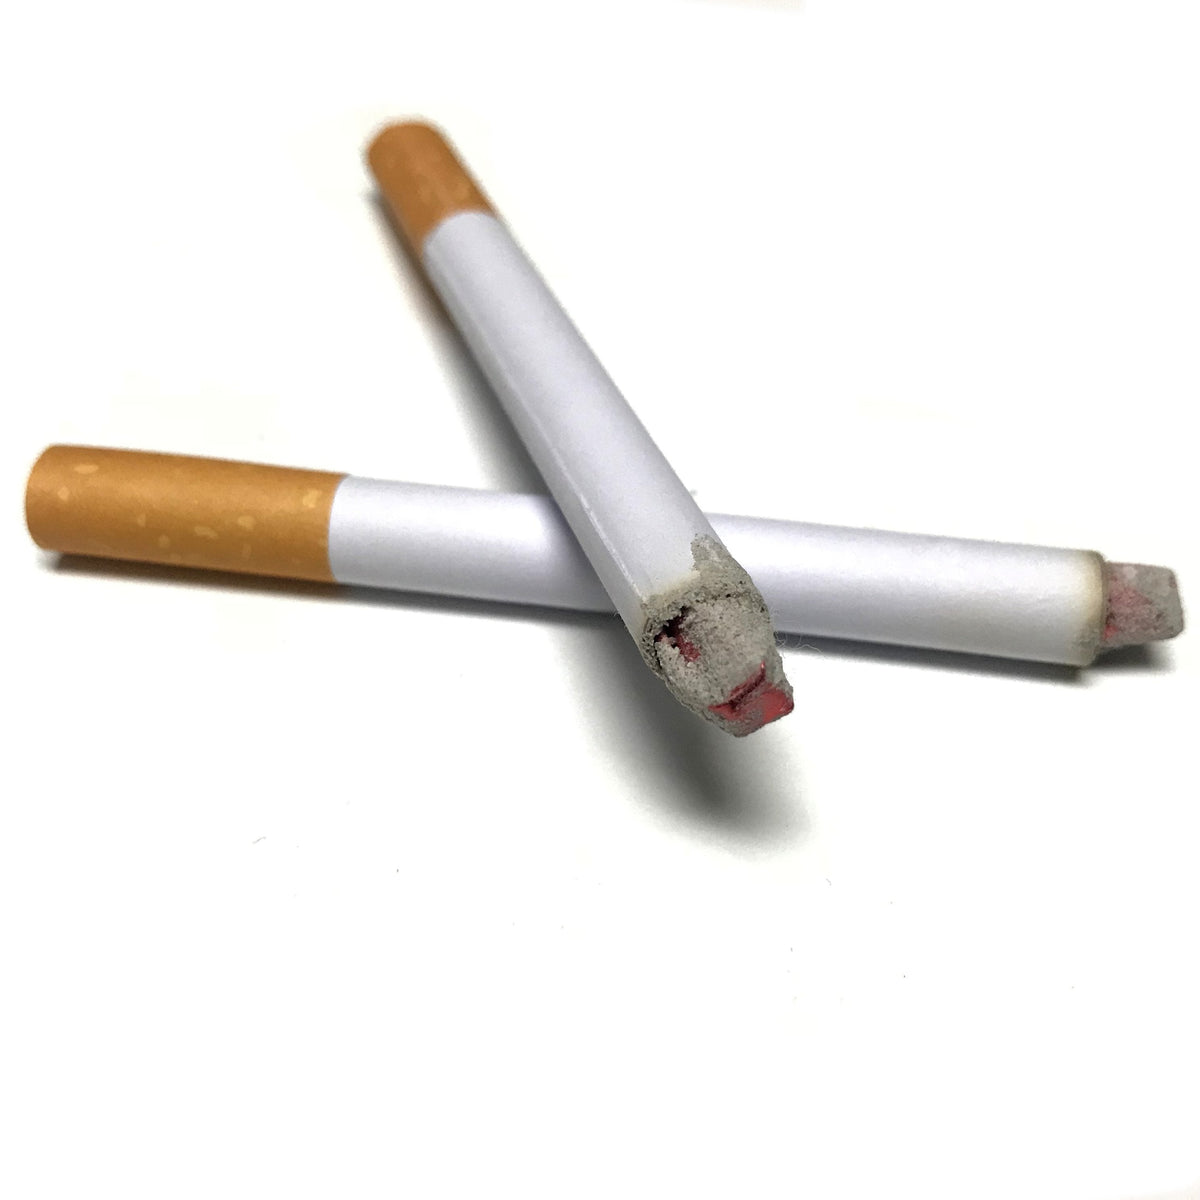 Fake Puff Puff Style Phony Cigarette with Powder Smoke Effect - 2 Pack